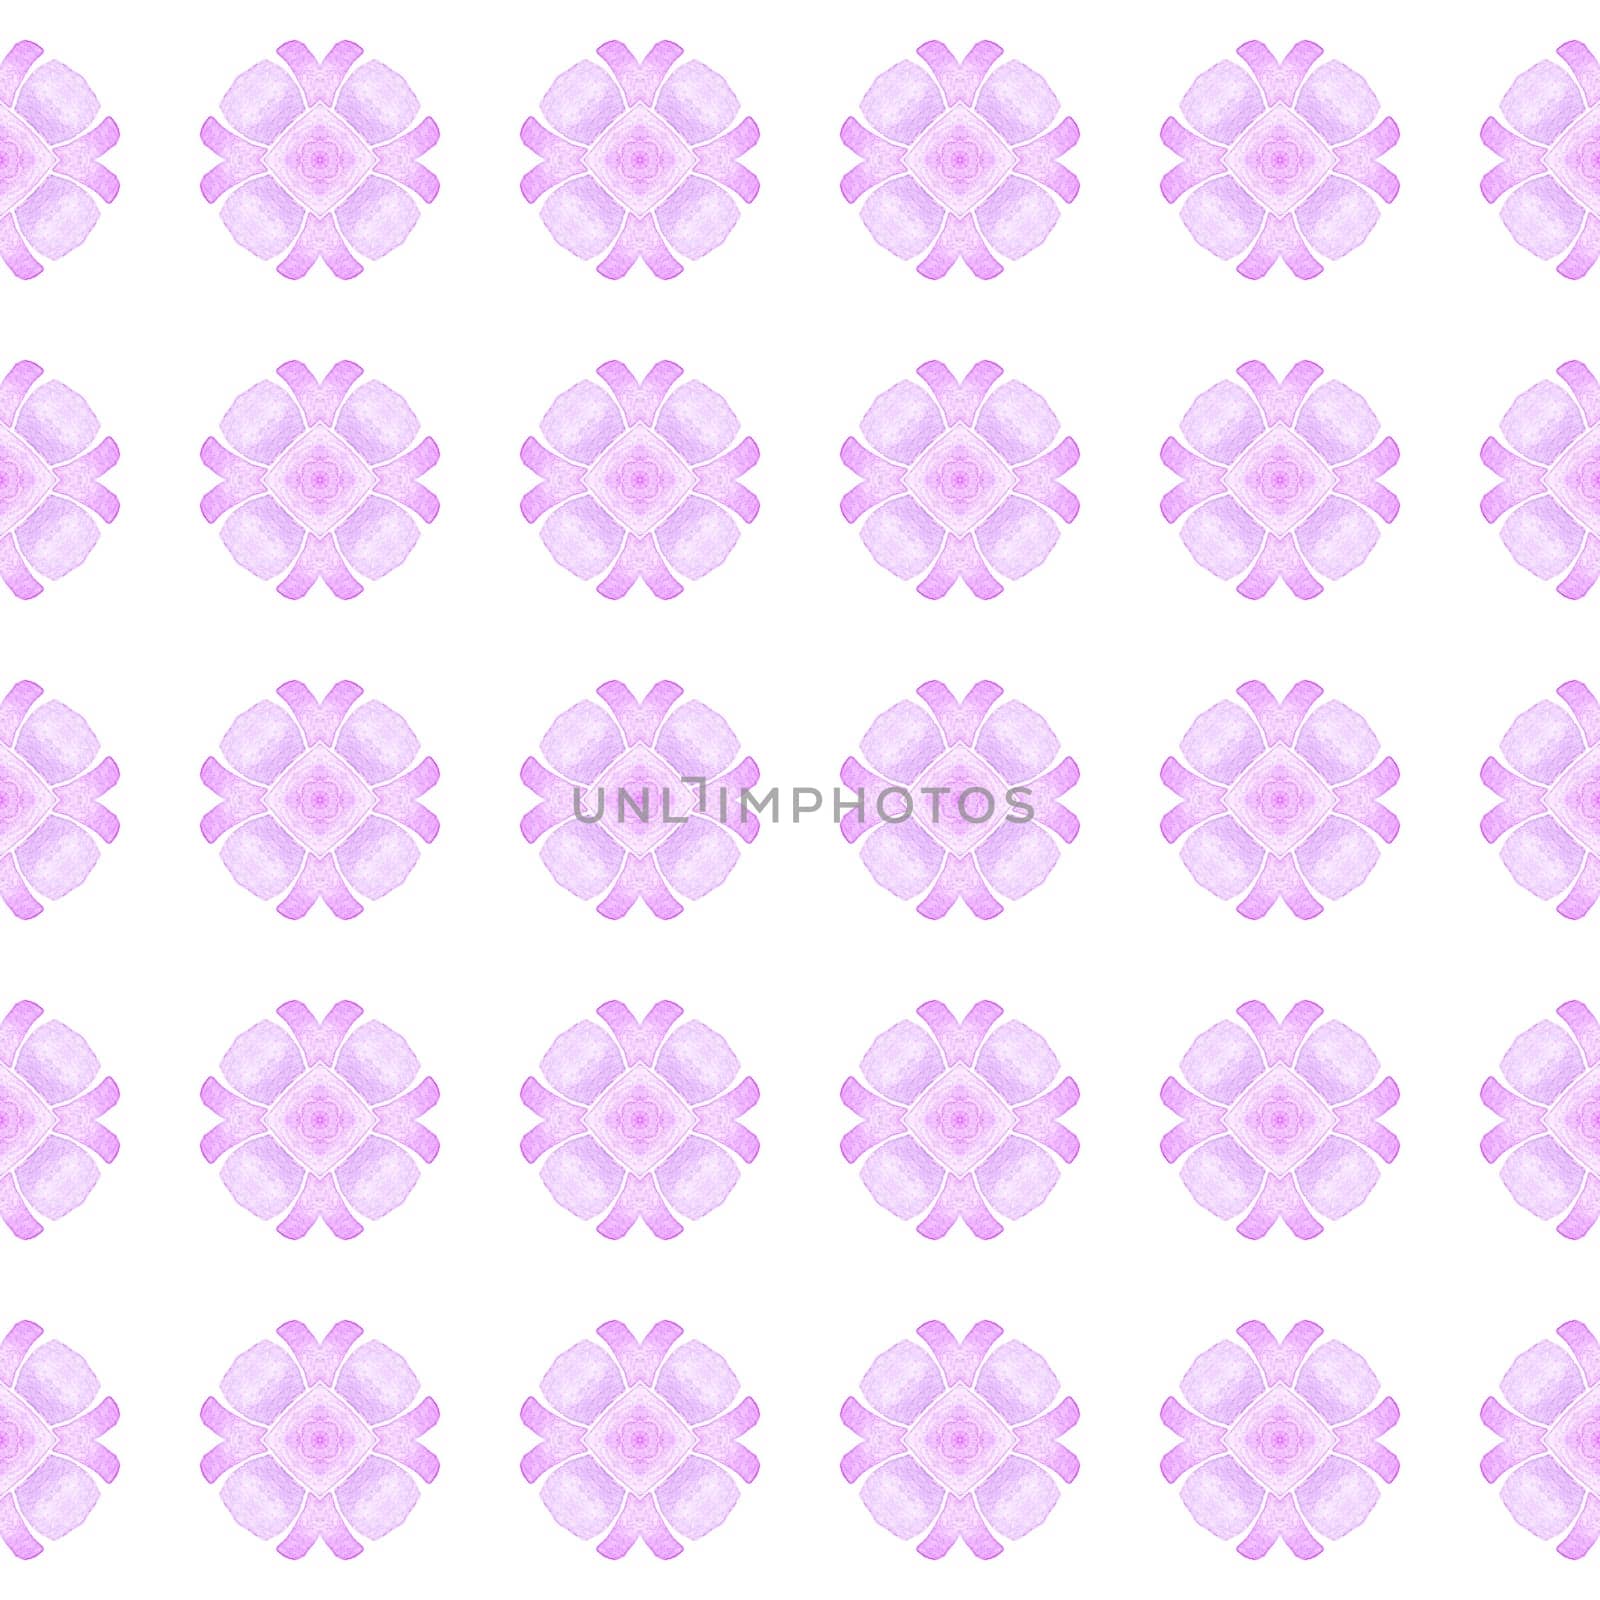 Tiled watercolor background. Purple grand boho chic summer design. Hand painted tiled watercolor border. Textile ready astonishing print, swimwear fabric, wallpaper, wrapping.